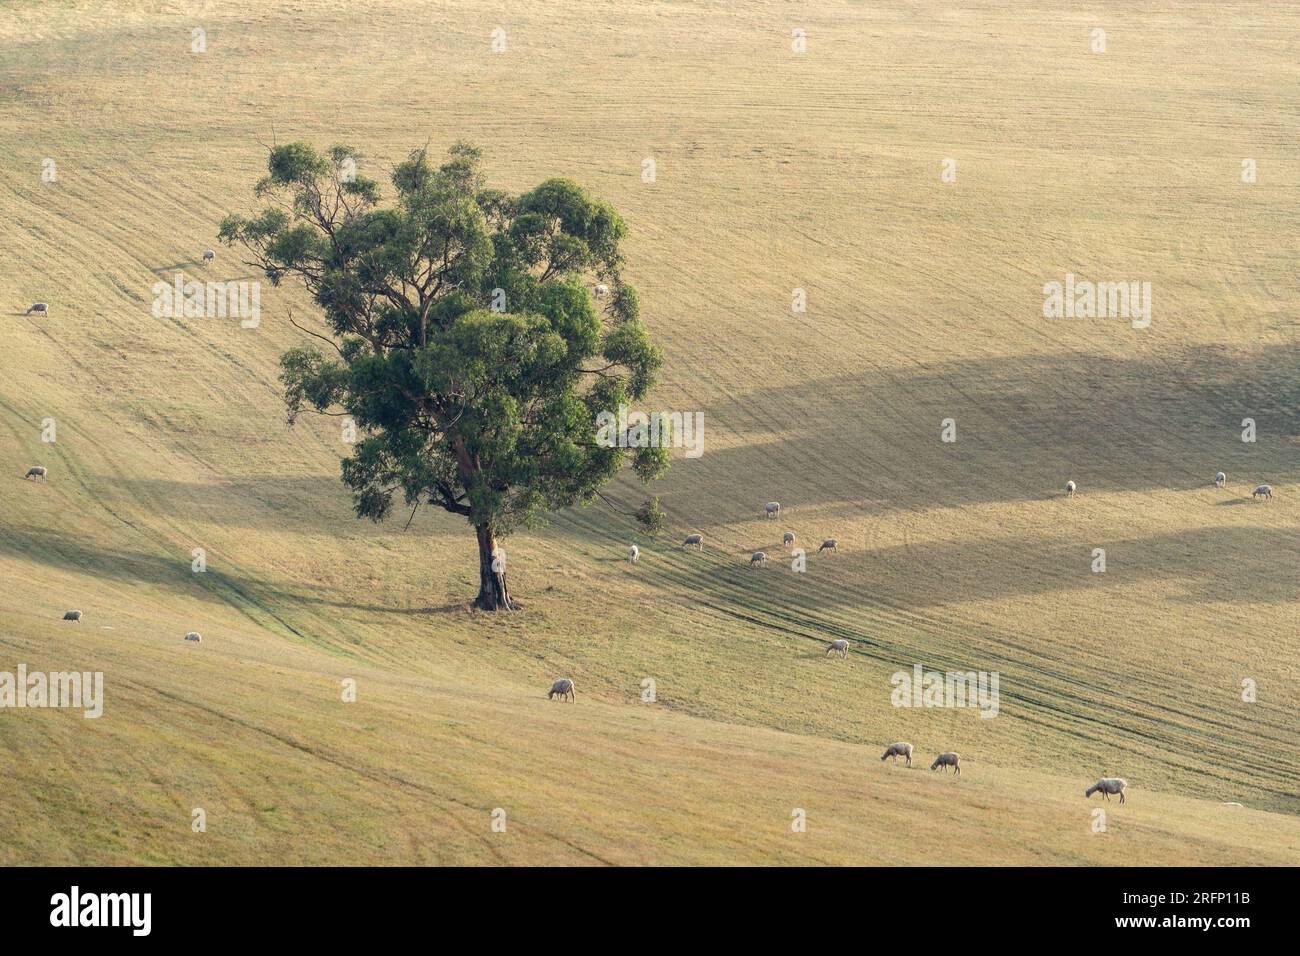 A lone eucalyptus tree standing in a dry paddock on a sunny hillside with a few sheep grazing Stock Photo